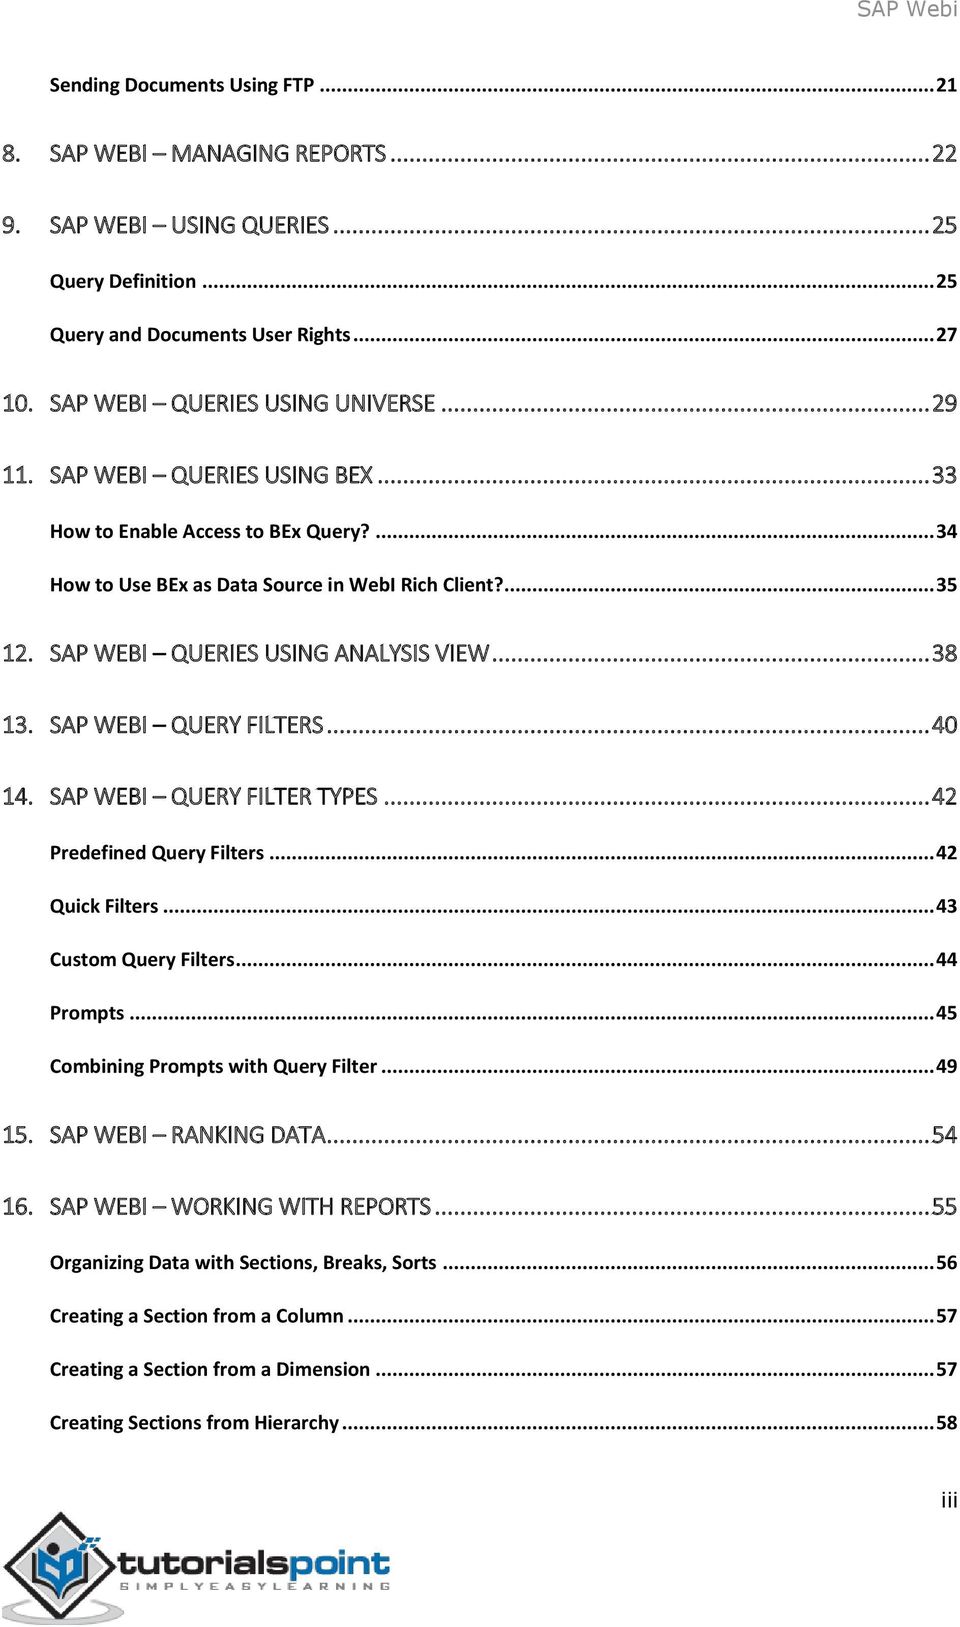 SAP WEBI QUERY FILTERS... 40 14. SAP WEBI QUERY FILTER TYPES... 42 Predefined Query Filters... 42 Quick Filters... 43 Custom Query Filters... 44 Prompts... 45 Combining Prompts with Query Filter.